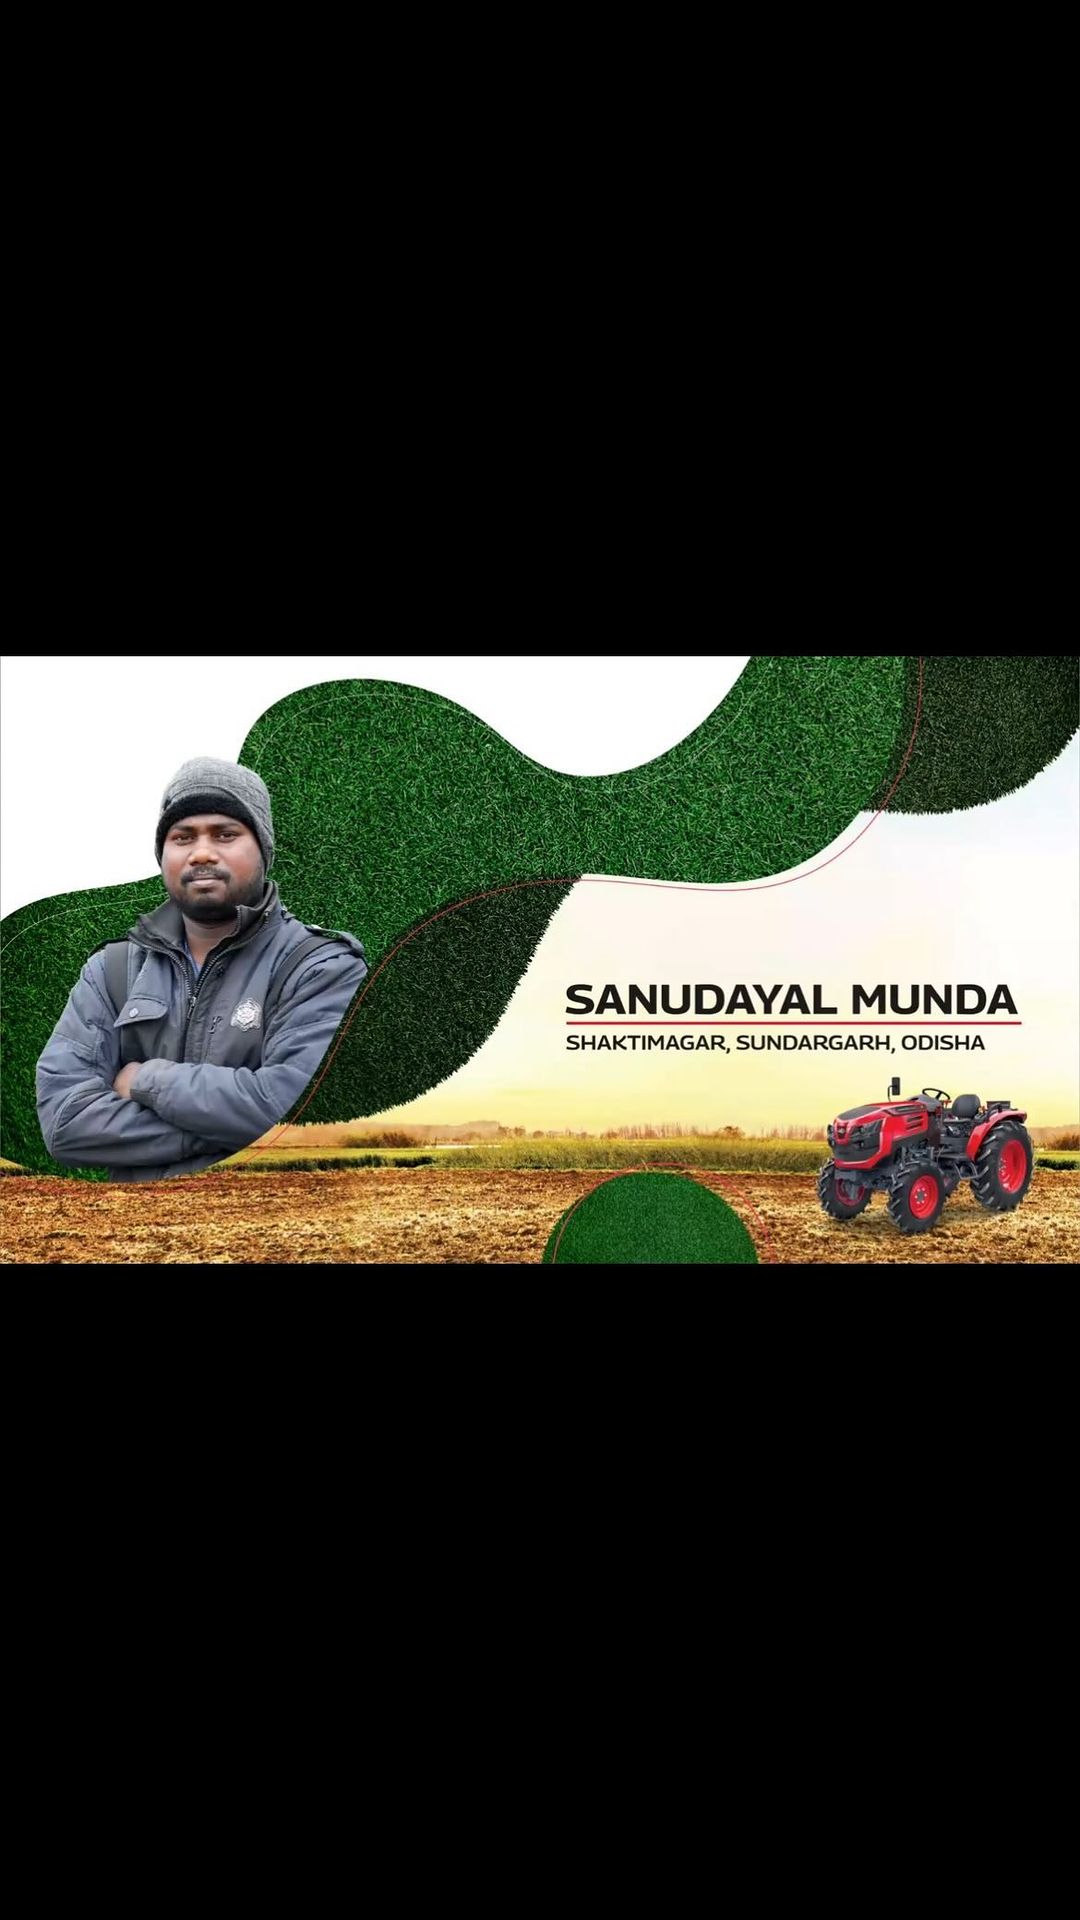 Sanudayal Munda, from Odisha trusts his Mahindra OJA 3140 tractor for his fields. Watch further to know more about his f...